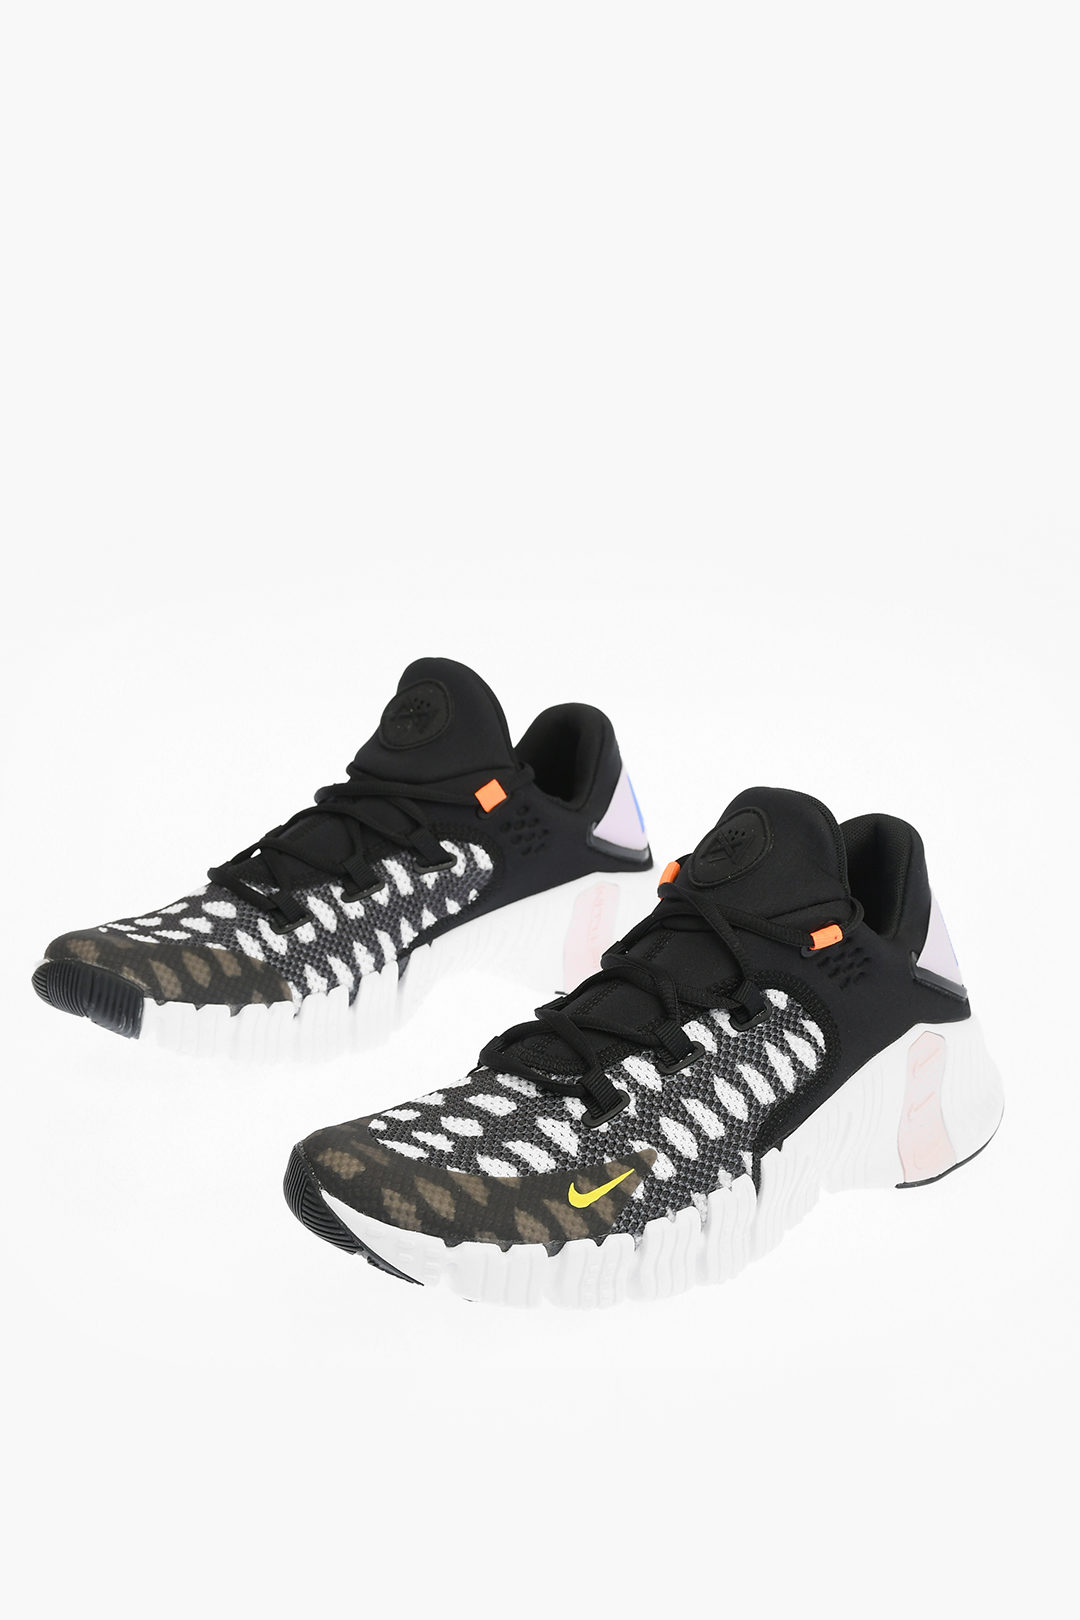 Nike Fabric FREE METCON Sneakers men - Glamood Outlet